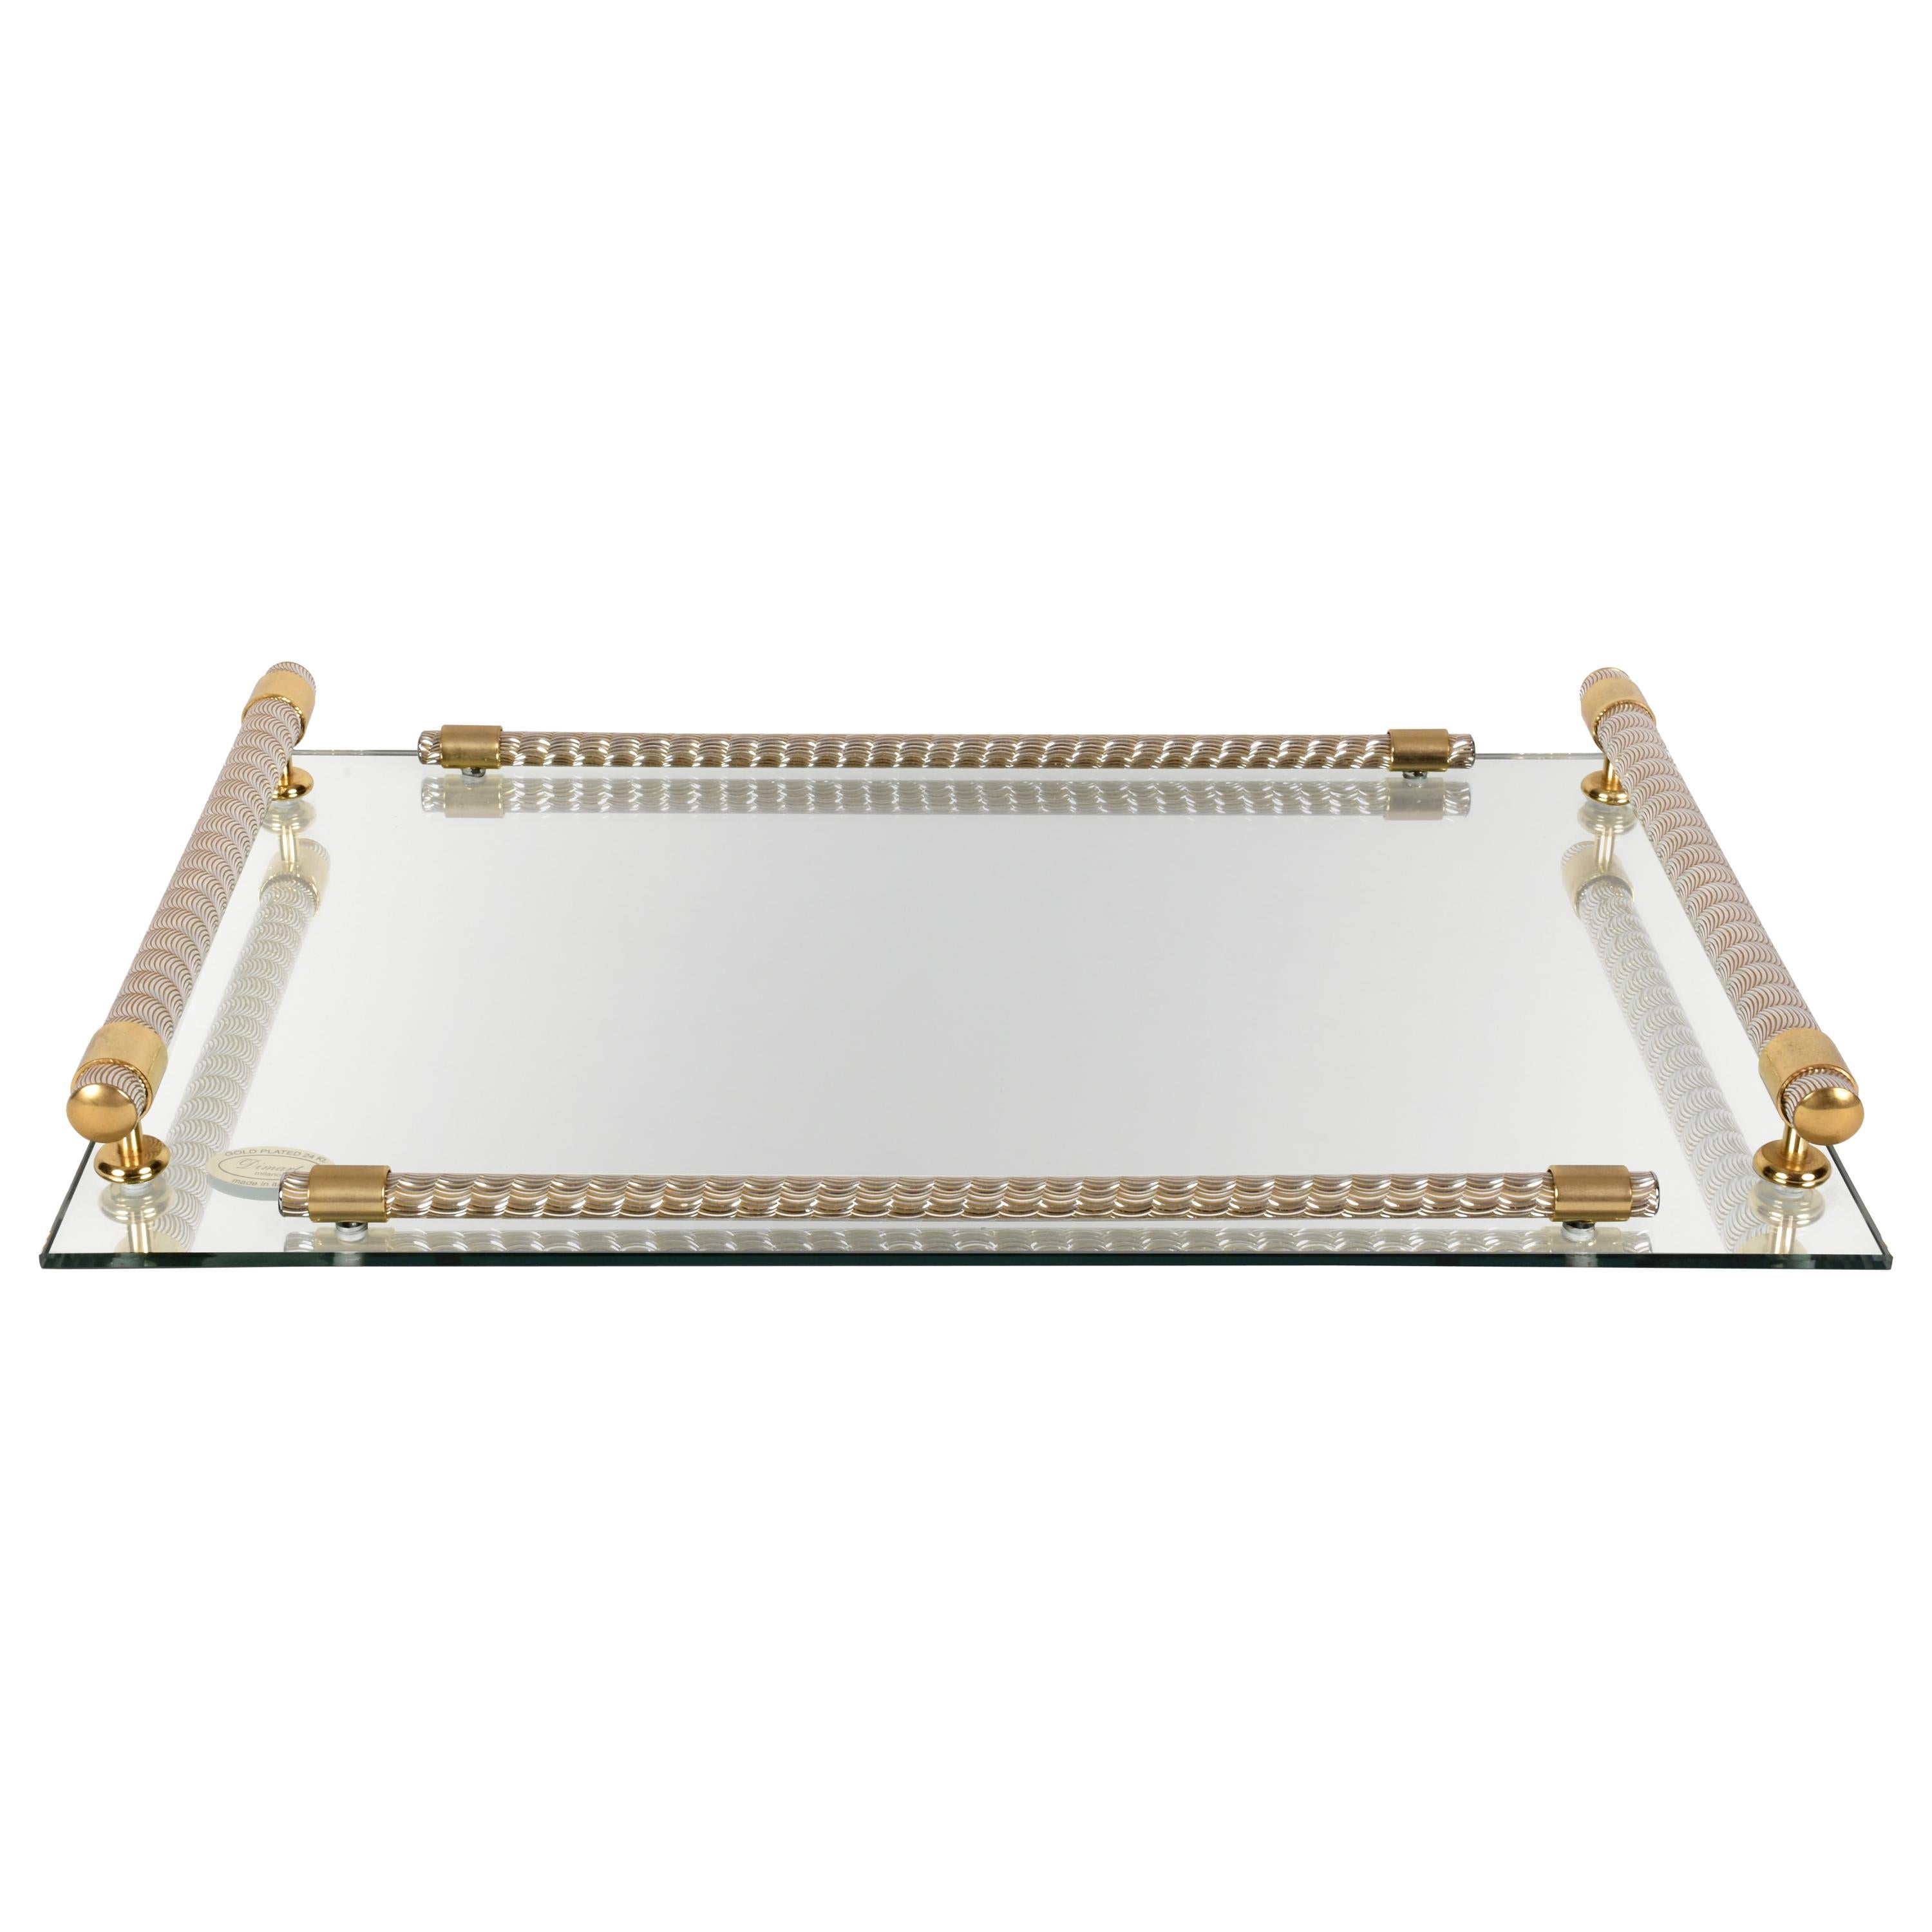 Dimart Milano 24-Karat Gold-Plated Italian Tray with Mirror and Brass, 1980s